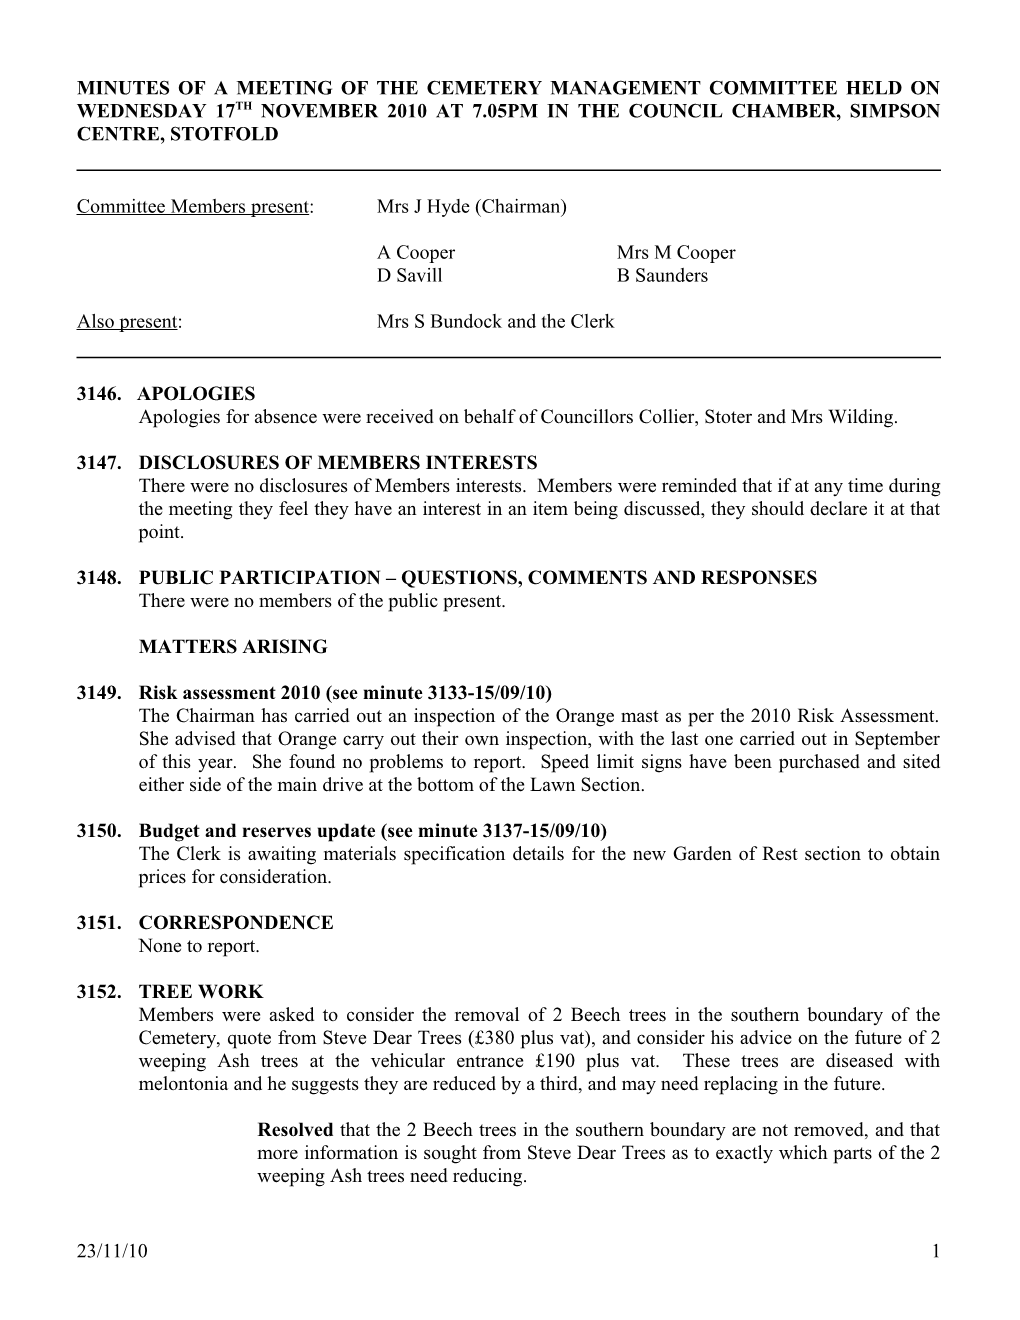 Minutes of a Meeting of the Cemetery Management Committee Held on Wednesday 17Th November